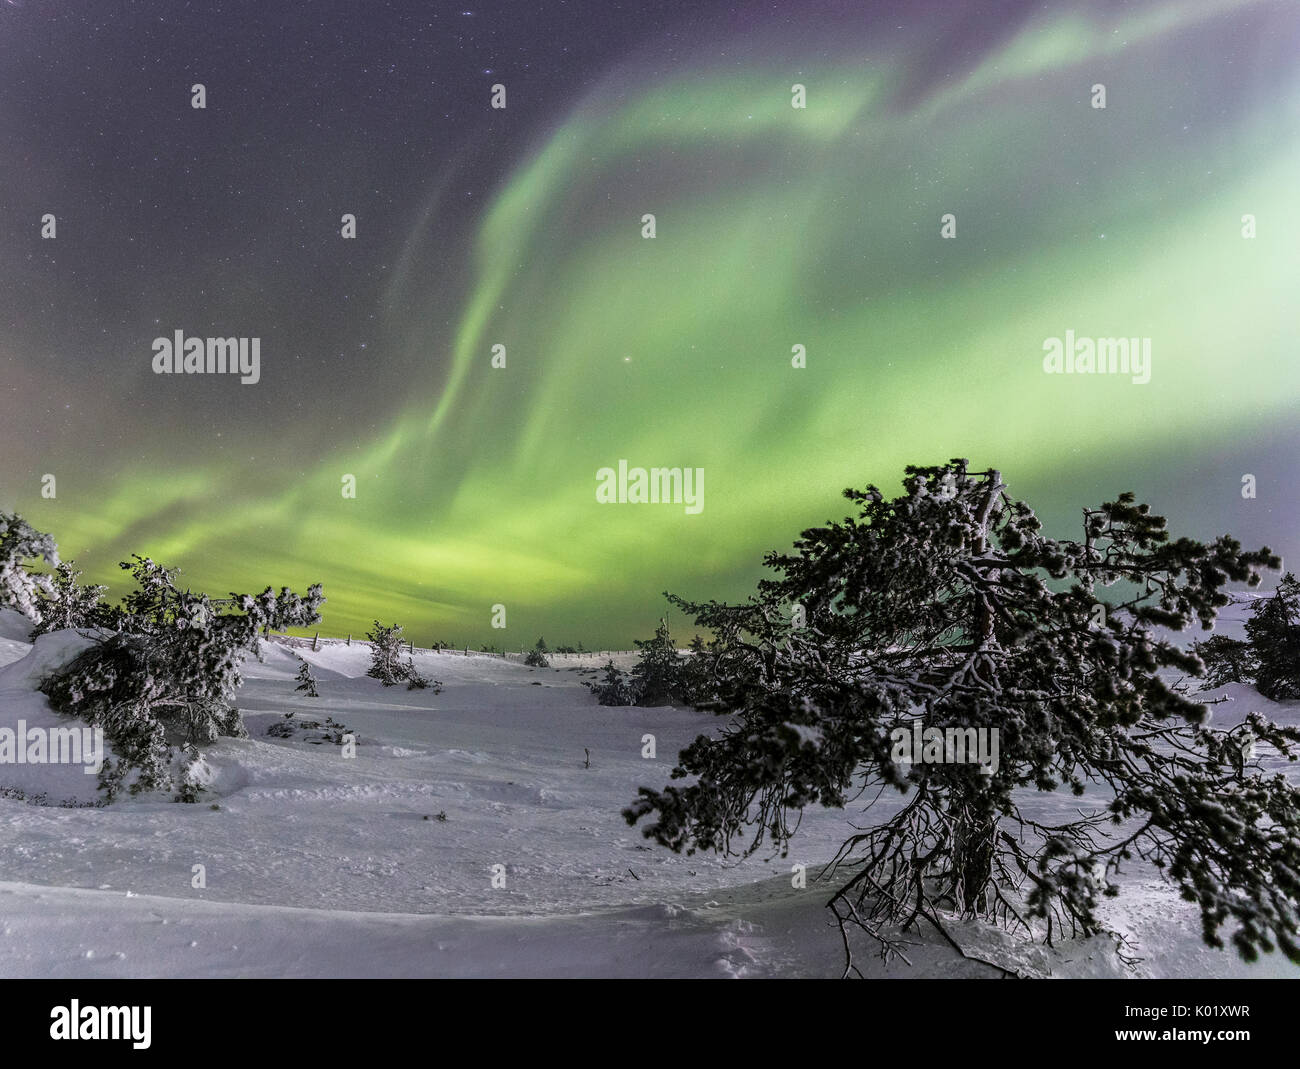 Panorama of snowy woods and frozen trees framed by Northern lights and stars Levi Sirkka Kittilä Lapland region Finland Europe Stock Photo